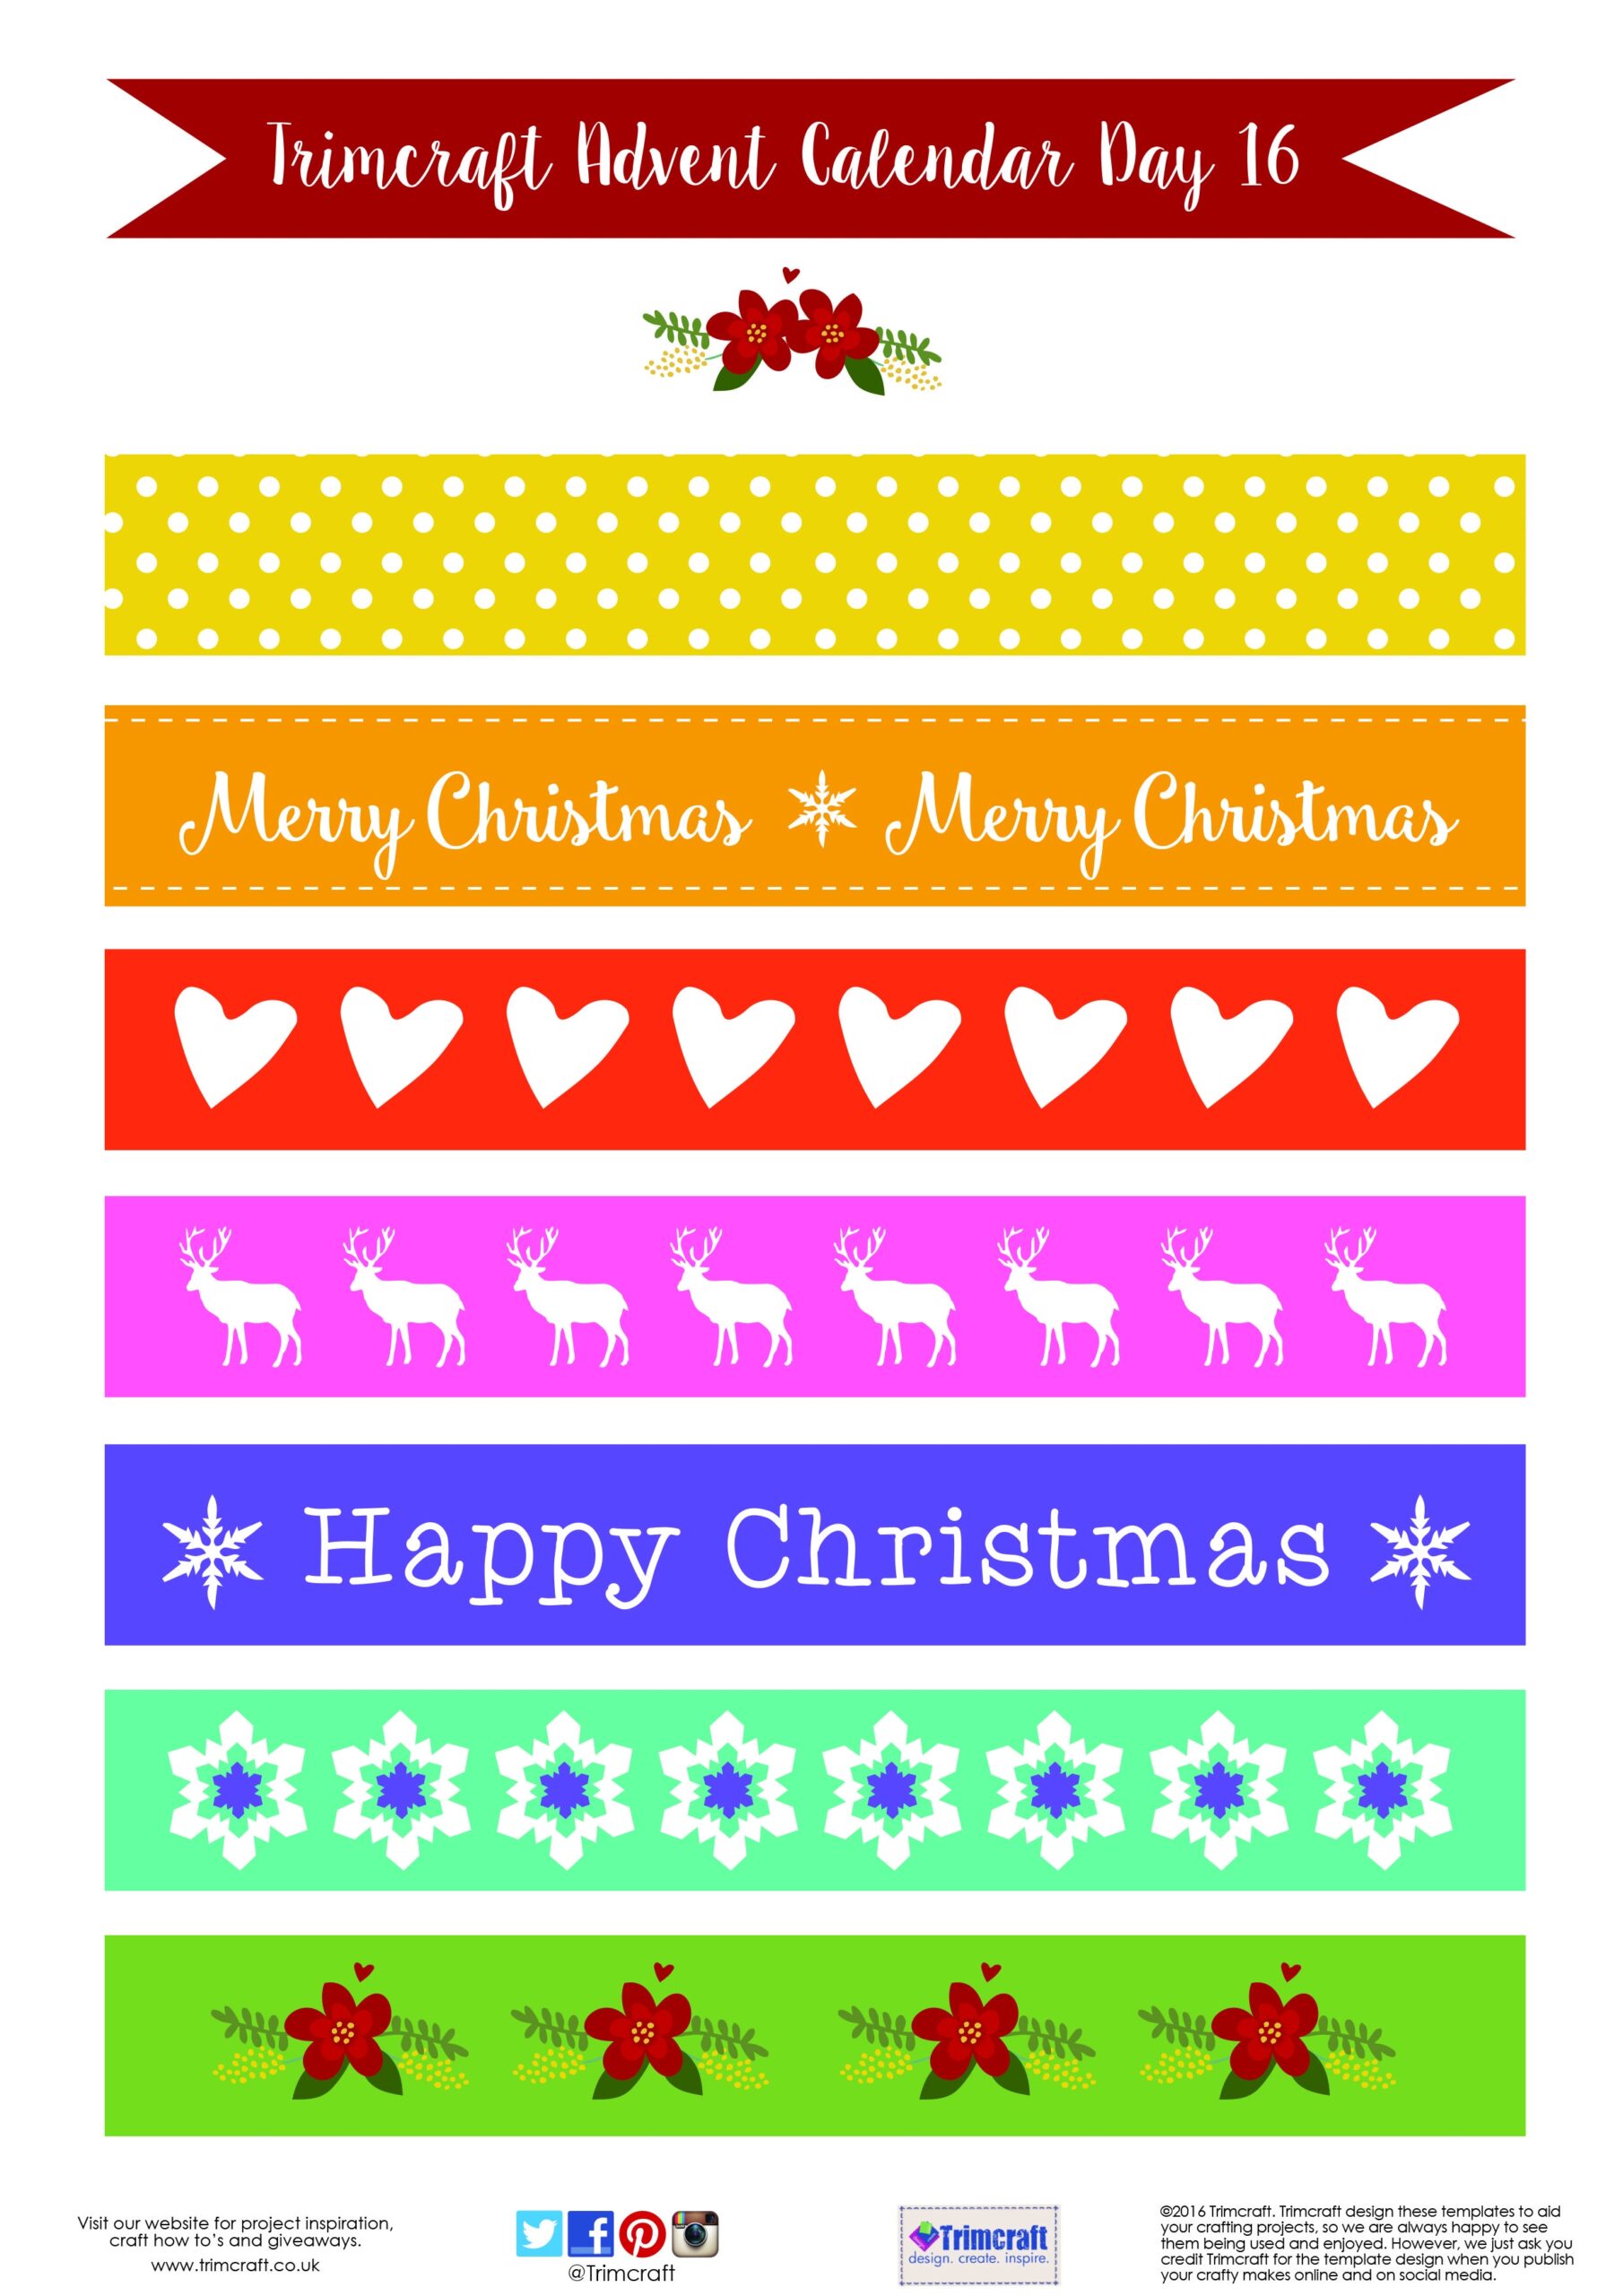 Trimcraft Advent Calendar Day 16 Free Printable Paper Chain Template Paper Chains Christmas Paper Chains Templates Printable Free